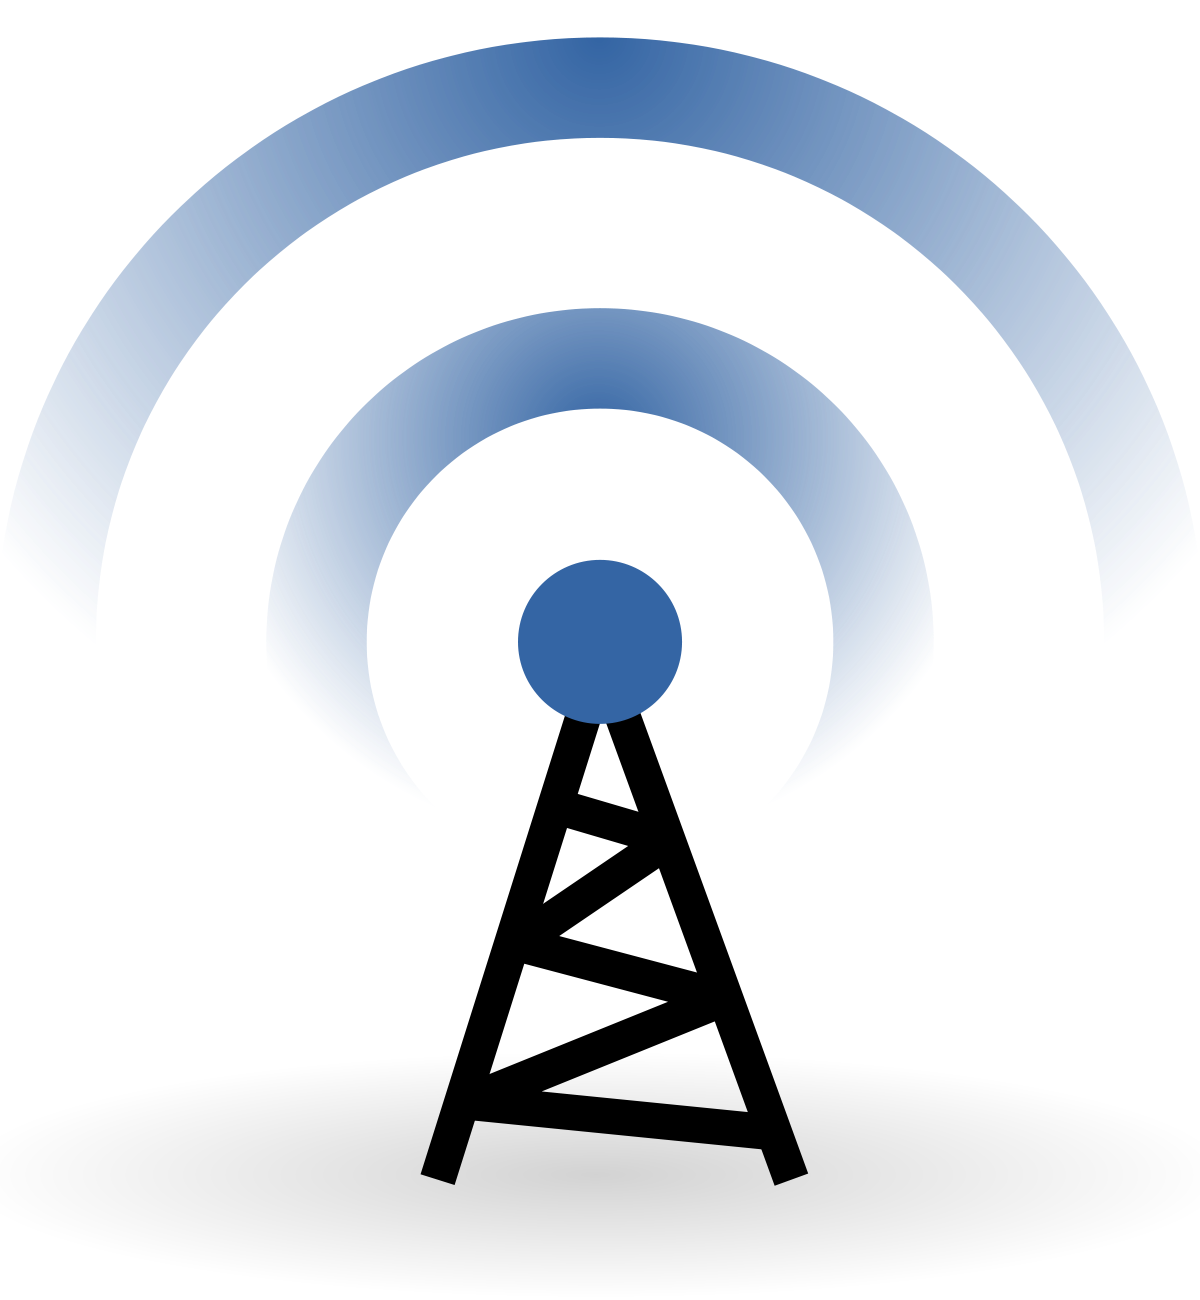 Reliable network connection icon